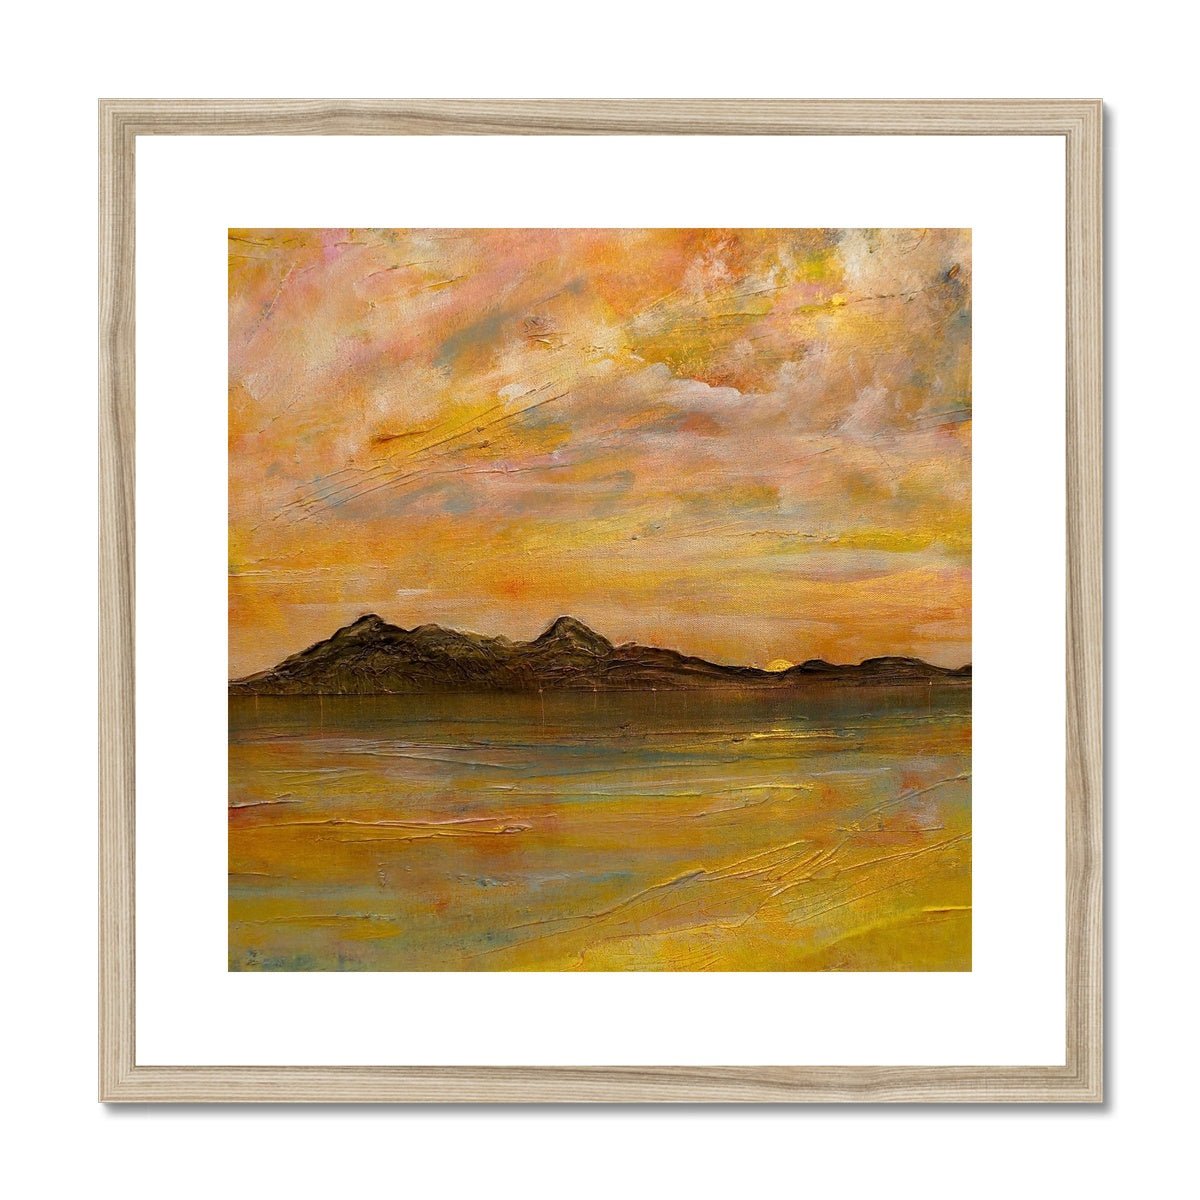 Arran Dusk Painting | Framed & Mounted Prints From Scotland-Framed & Mounted Prints-Arran Art Gallery-20"x20"-Natural Frame-Paintings, Prints, Homeware, Art Gifts From Scotland By Scottish Artist Kevin Hunter